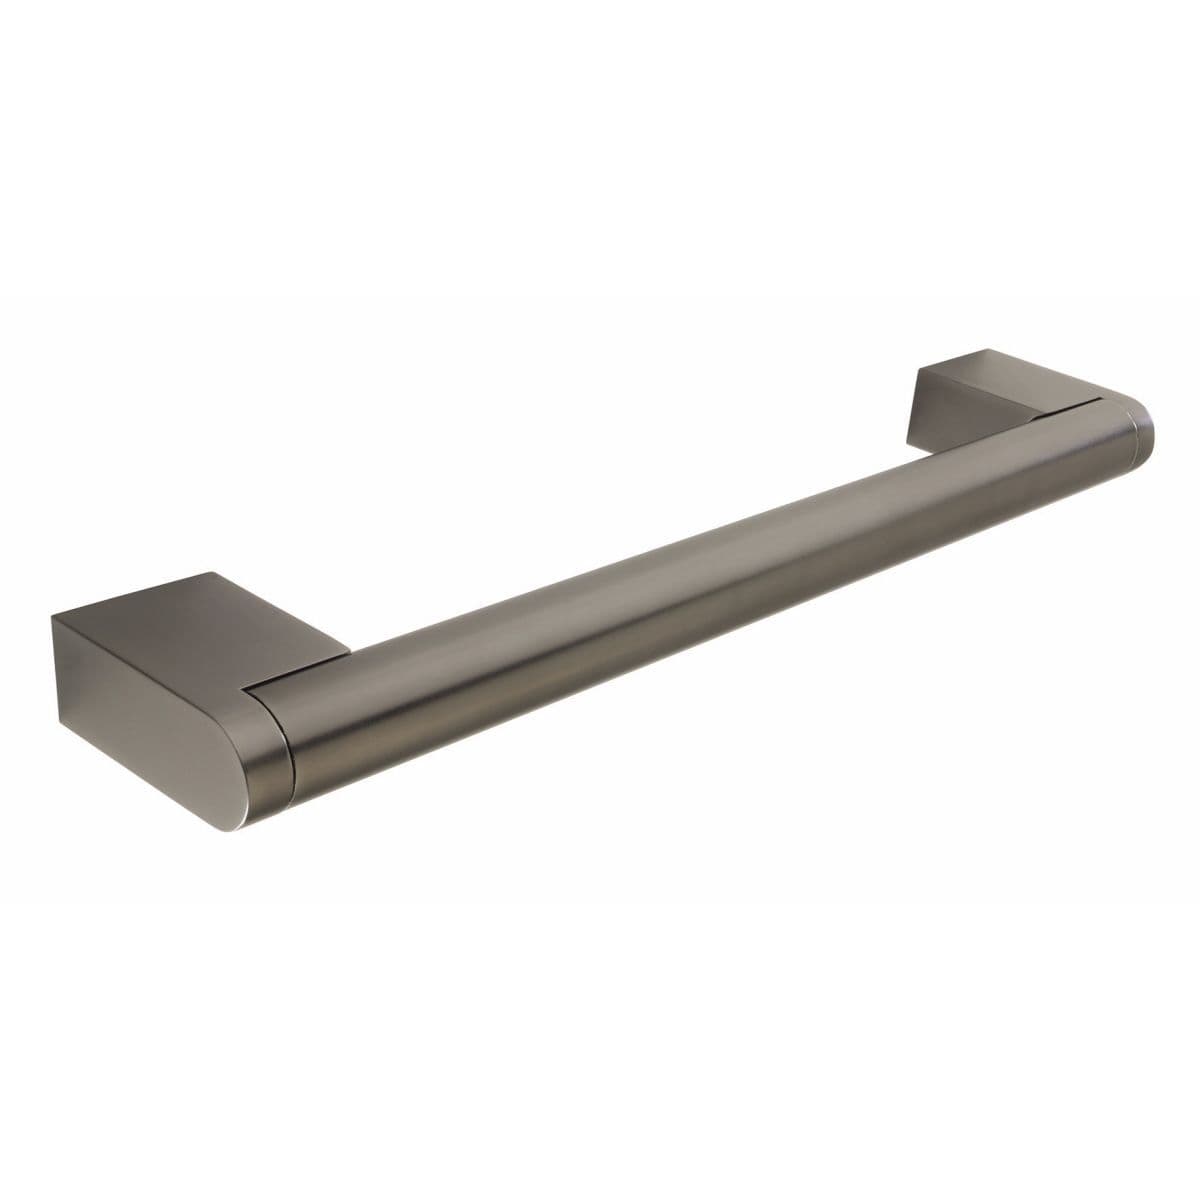 THORPE 14mm dia BAR Cupboard Handle - 2 sizes - 2 finishes ((PWS H109.188/H110.237)